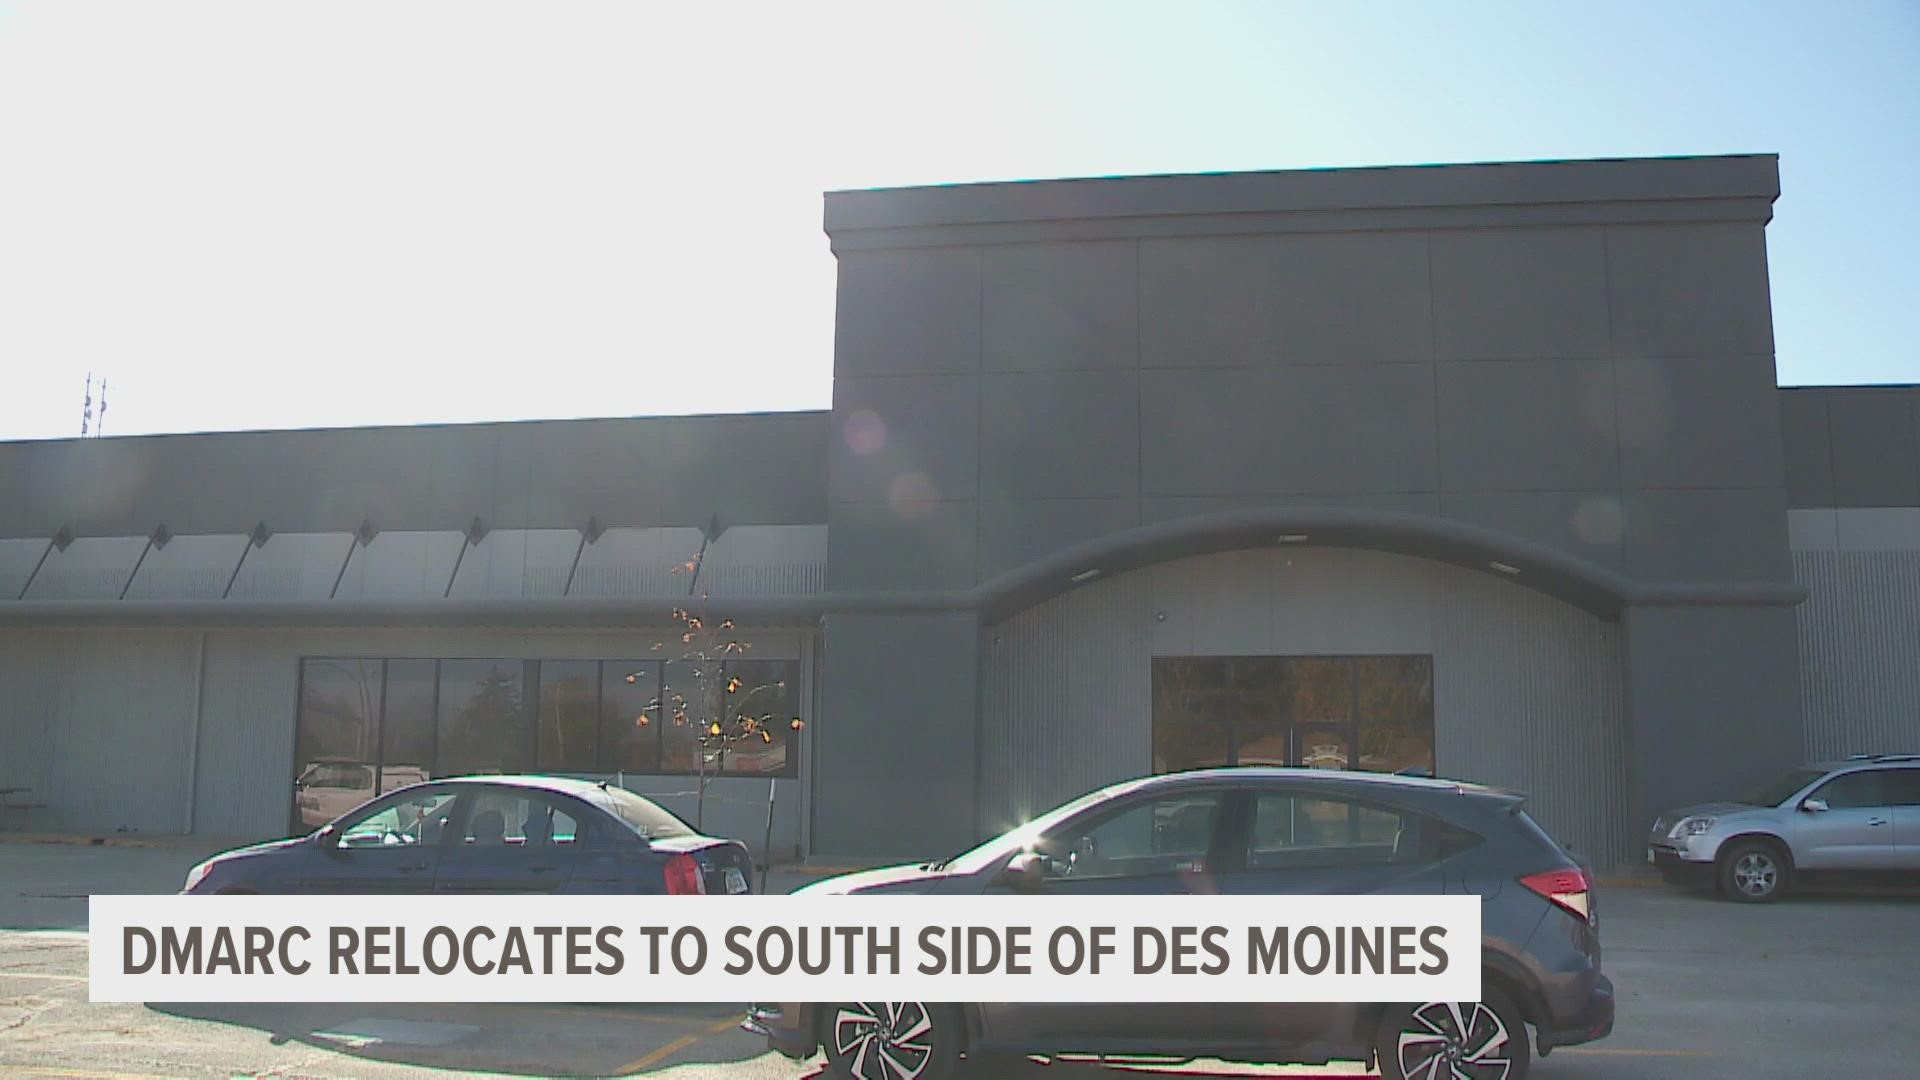 The Des Moines Area Religious Council announced its move is needed because of a nearly 80% increase in the number of people the organization has assisted since 2014.